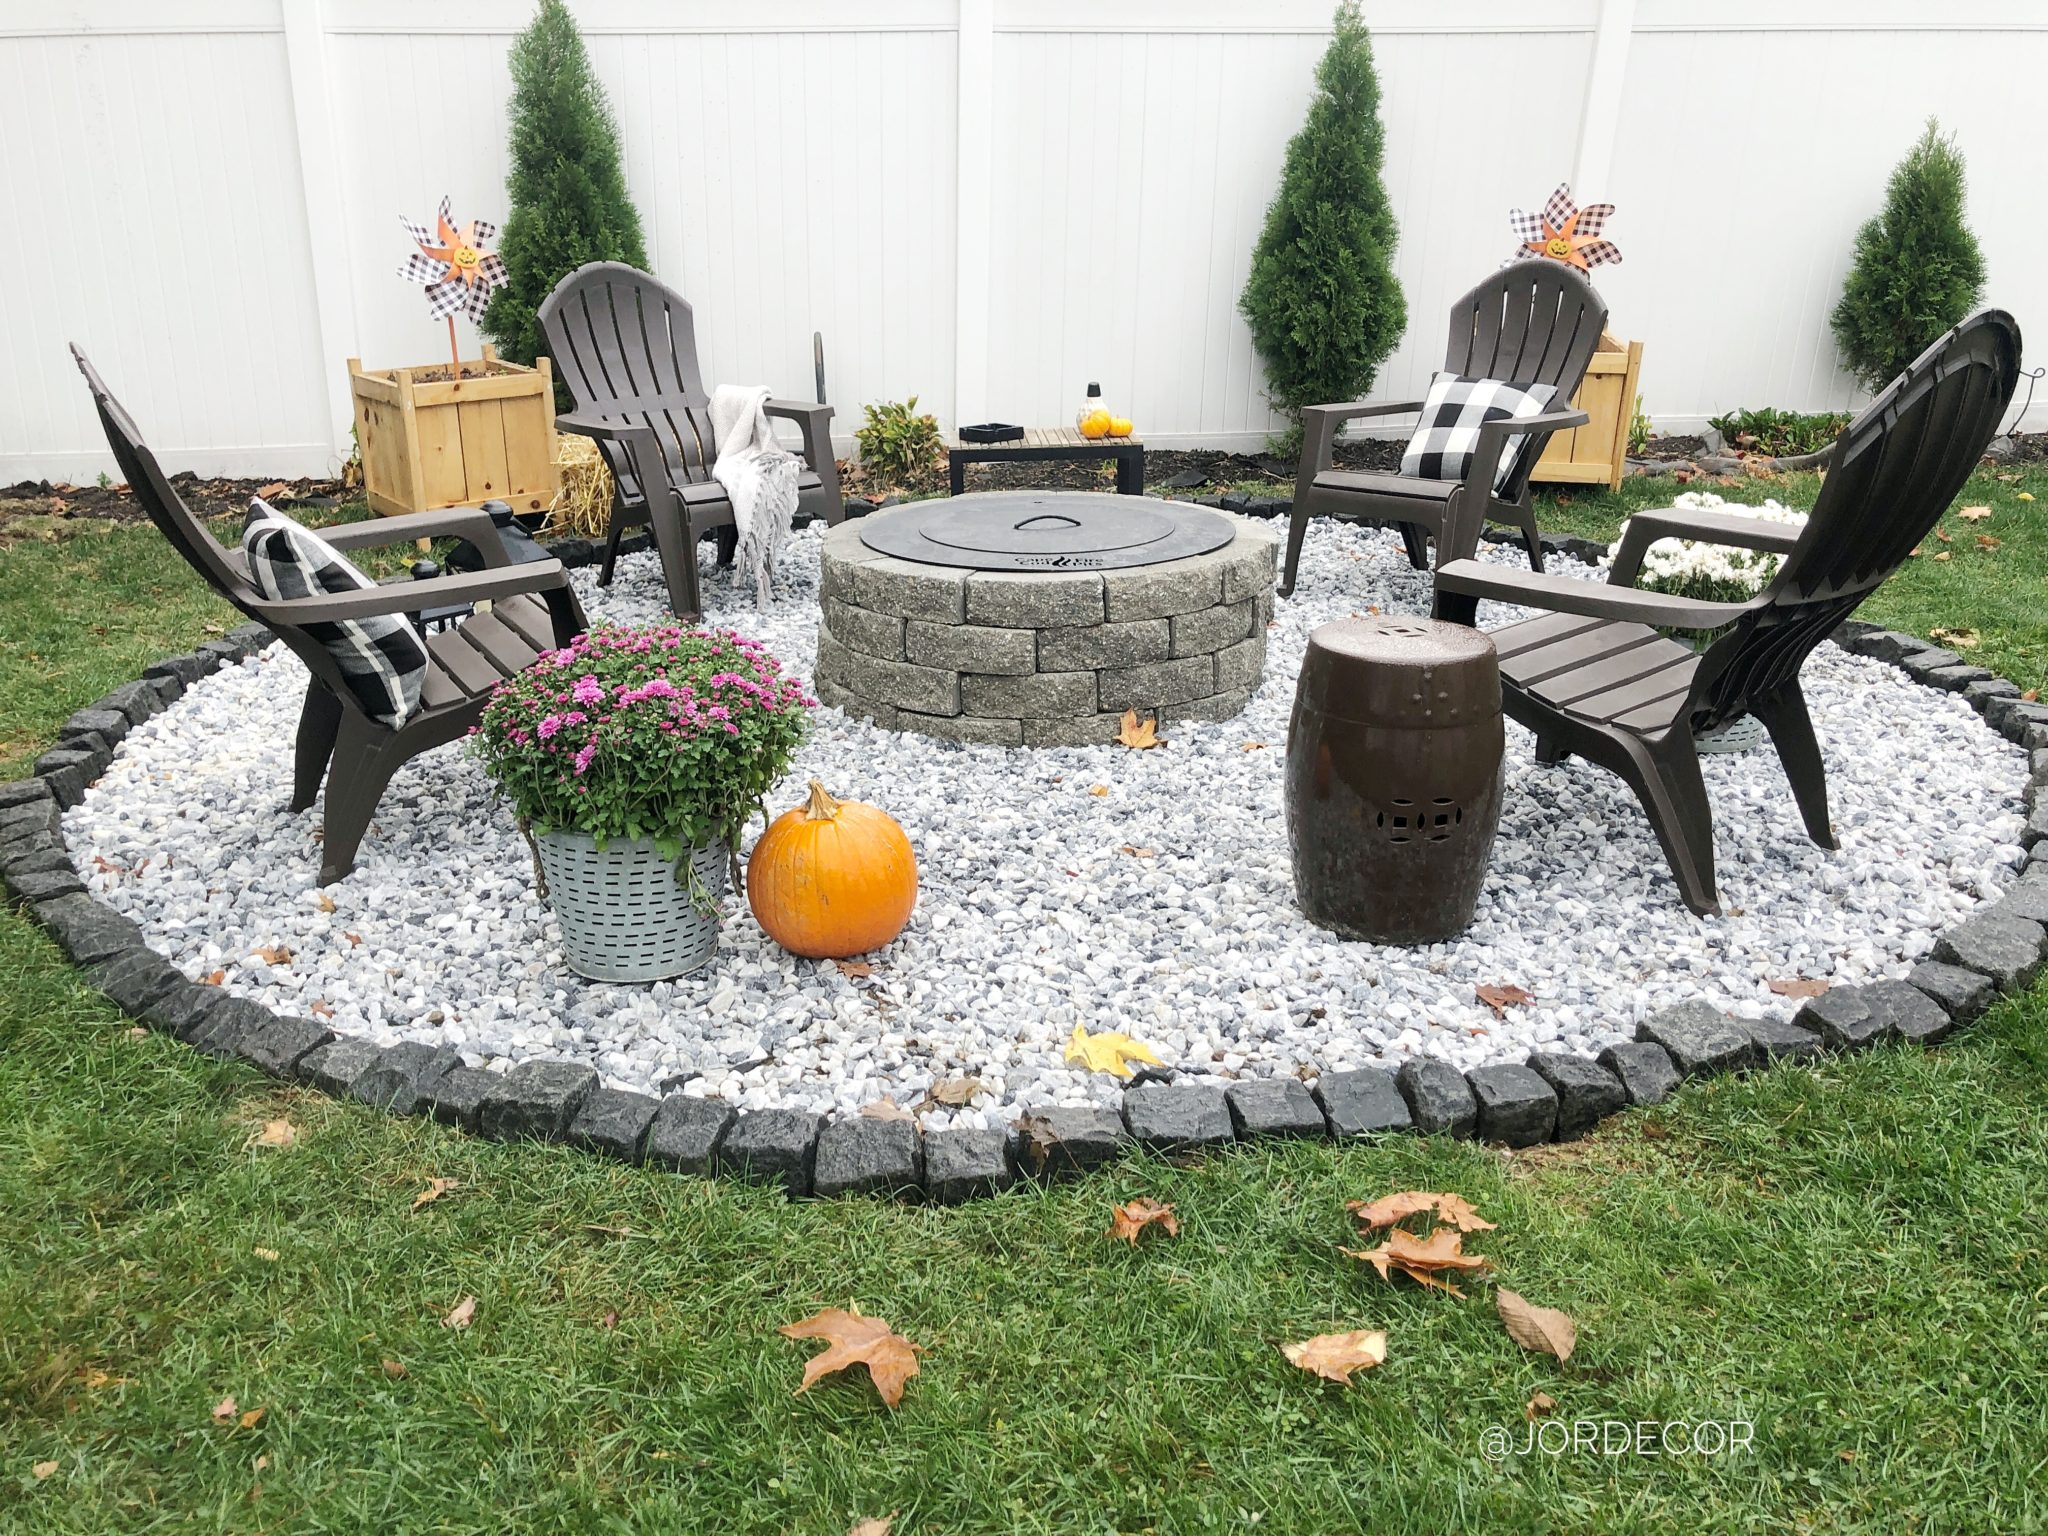 Diy Fire Pit Area In A Weekend Jordecor, Fire Pit Sand Gravel